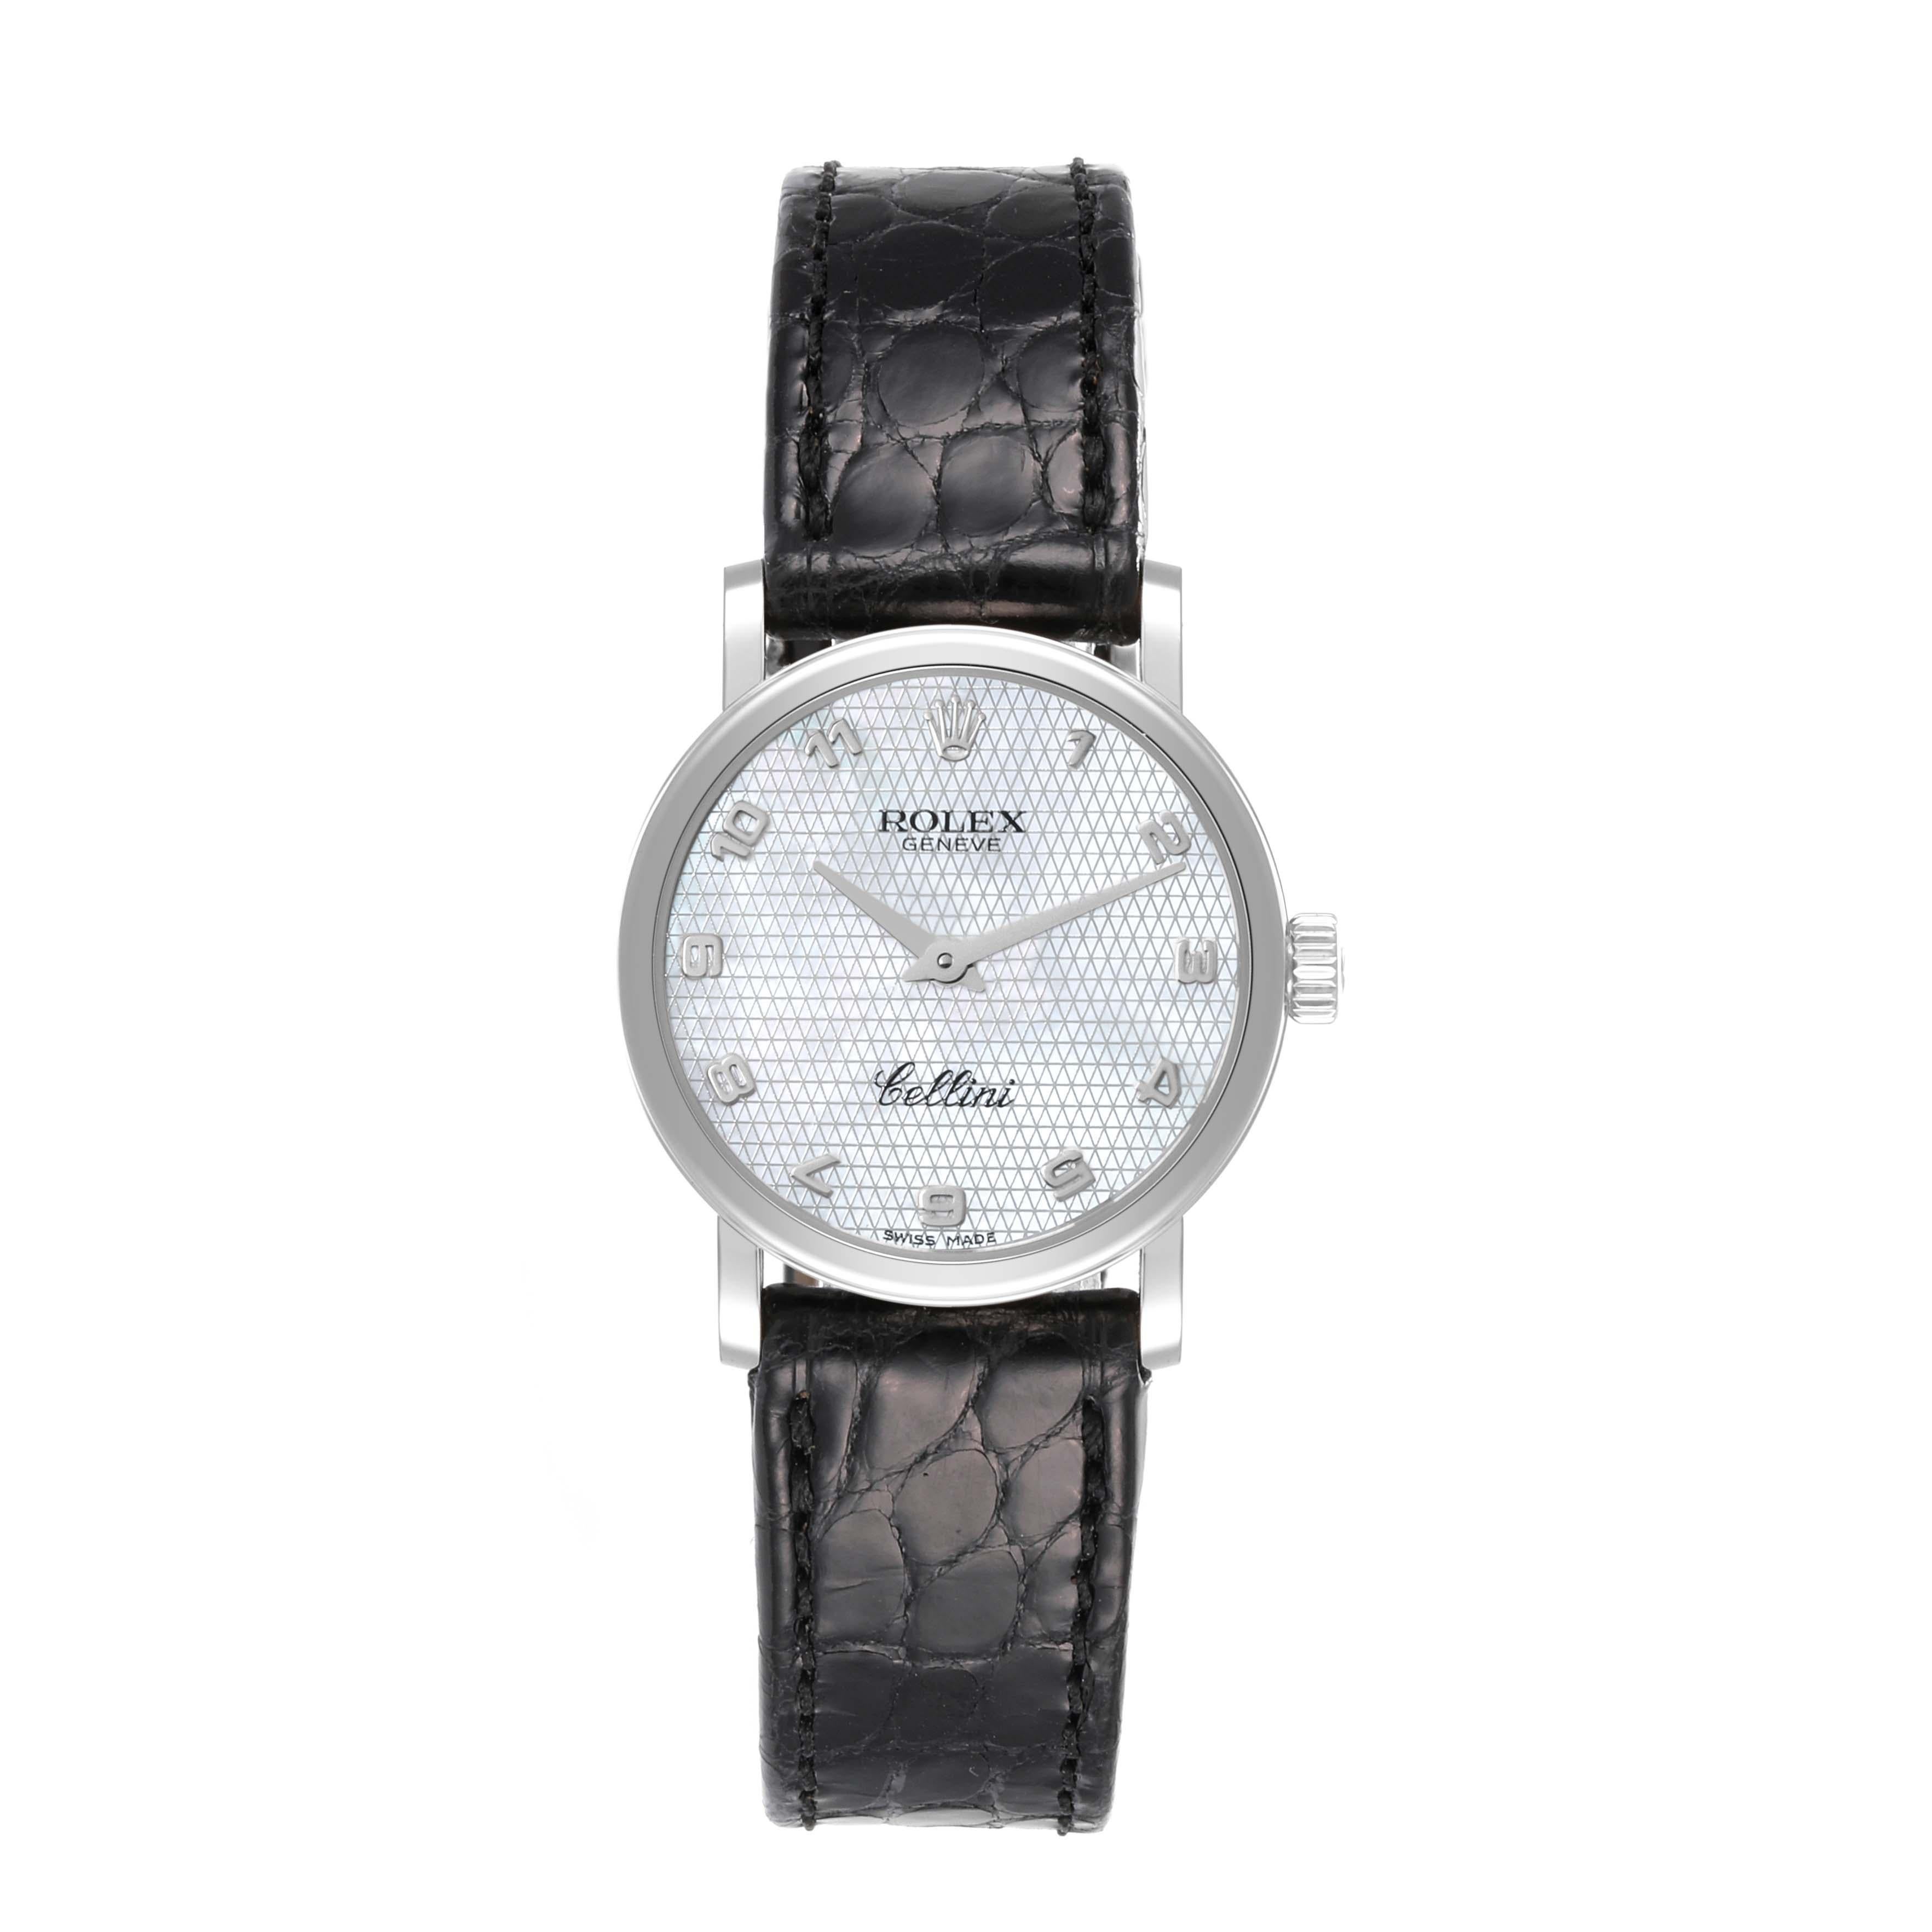 Rolex Cellini Classic White Gold Mother Of Pearl Dial Ladies Watch 6110 Unworn. Quartz movement. 18k white gold slim case 26.0 mm in diameter. . Scratch resistant sapphire crystal. Flat profile. Textured mother of pearl dial with raised Arabic